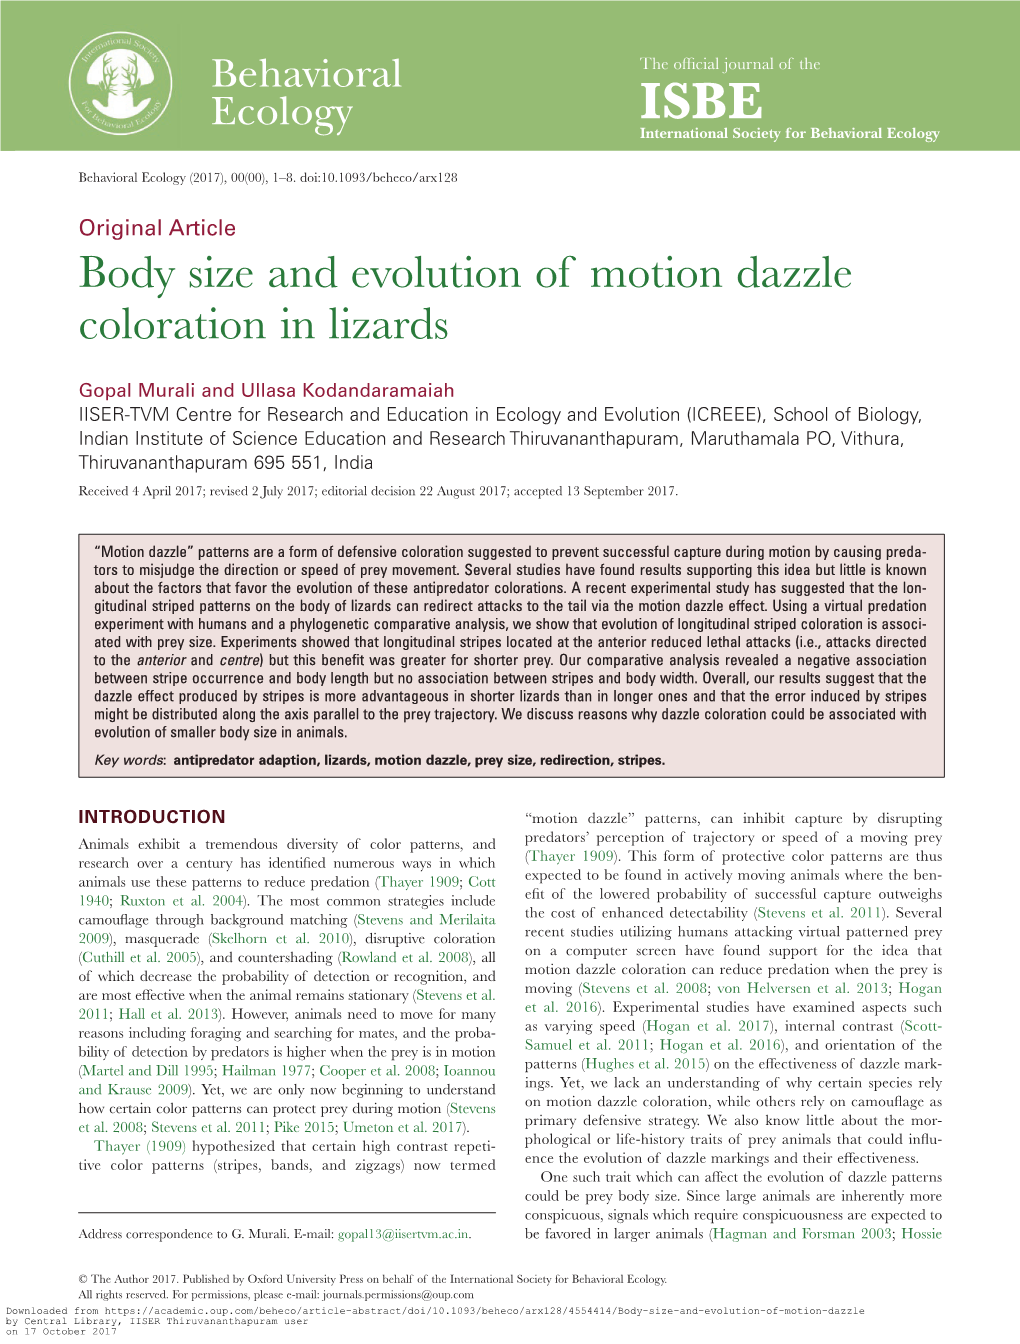 Body Size and Evolution of Motion Dazzle Coloration in Lizards